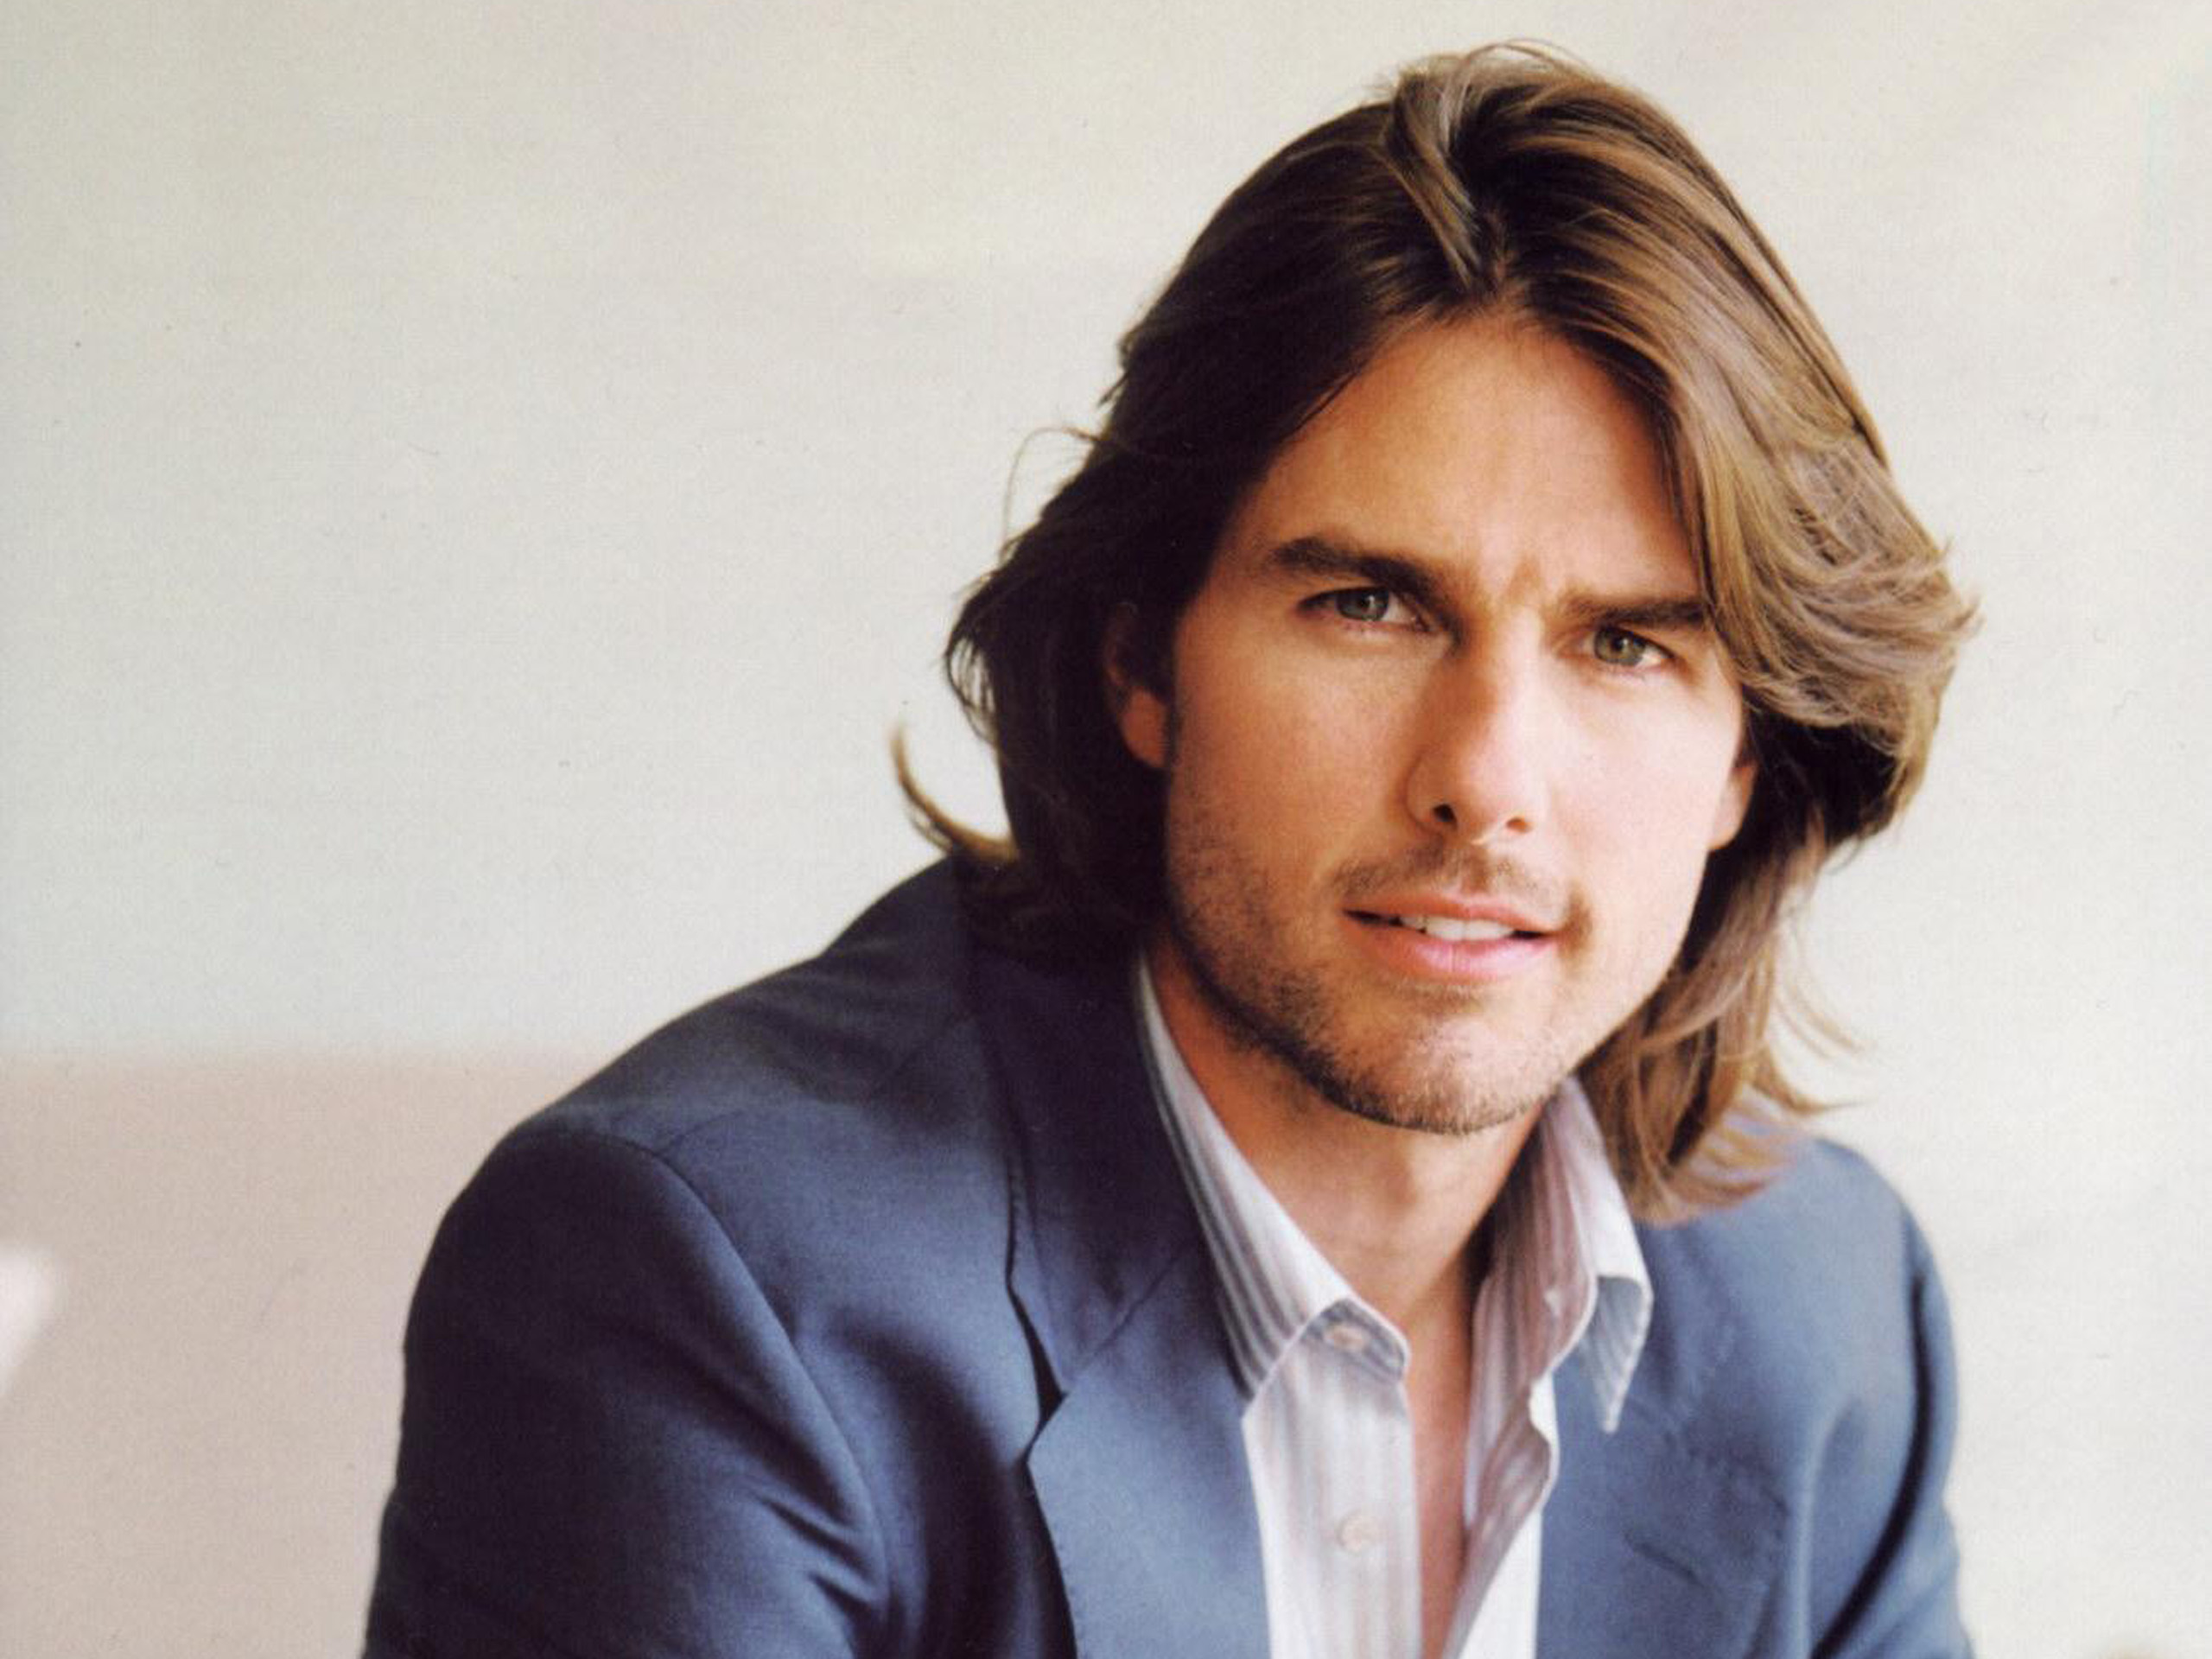 Handsome Hollywood Star Tom Cruise Cool Long Hair Photo - Tom Cruise Long Hair  Style - 2560x1920 Wallpaper 